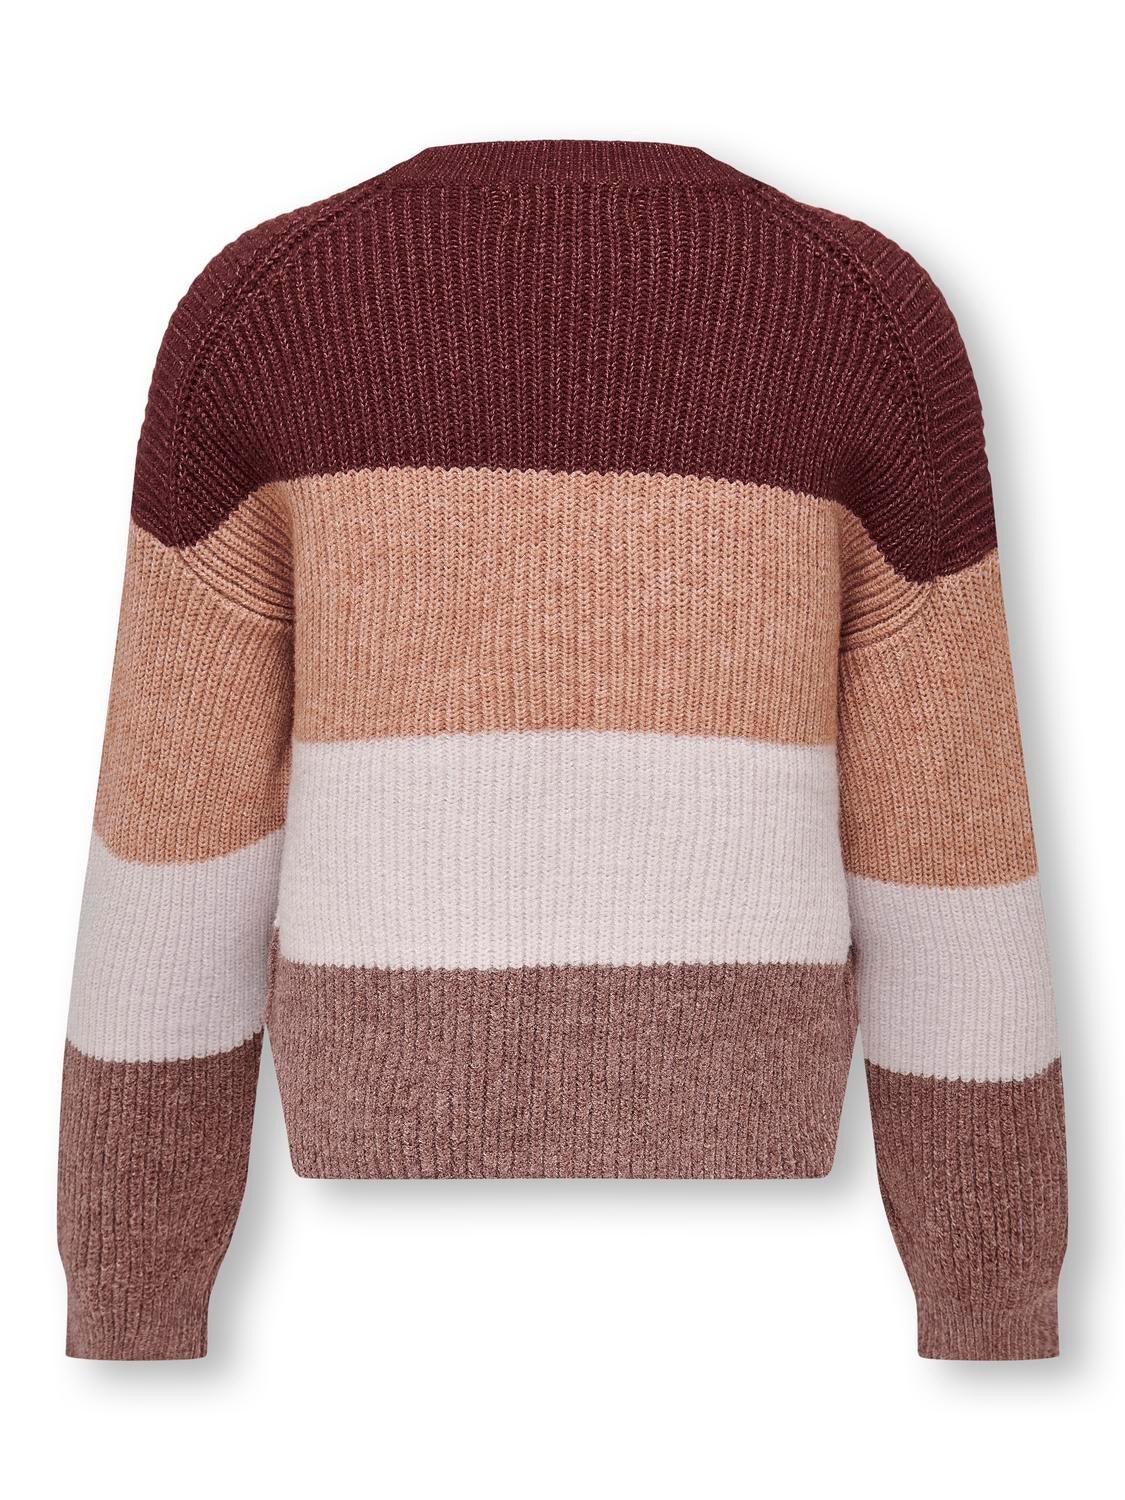 ONLY Striped Knitted Pullover -Spiced Apple - 15207169